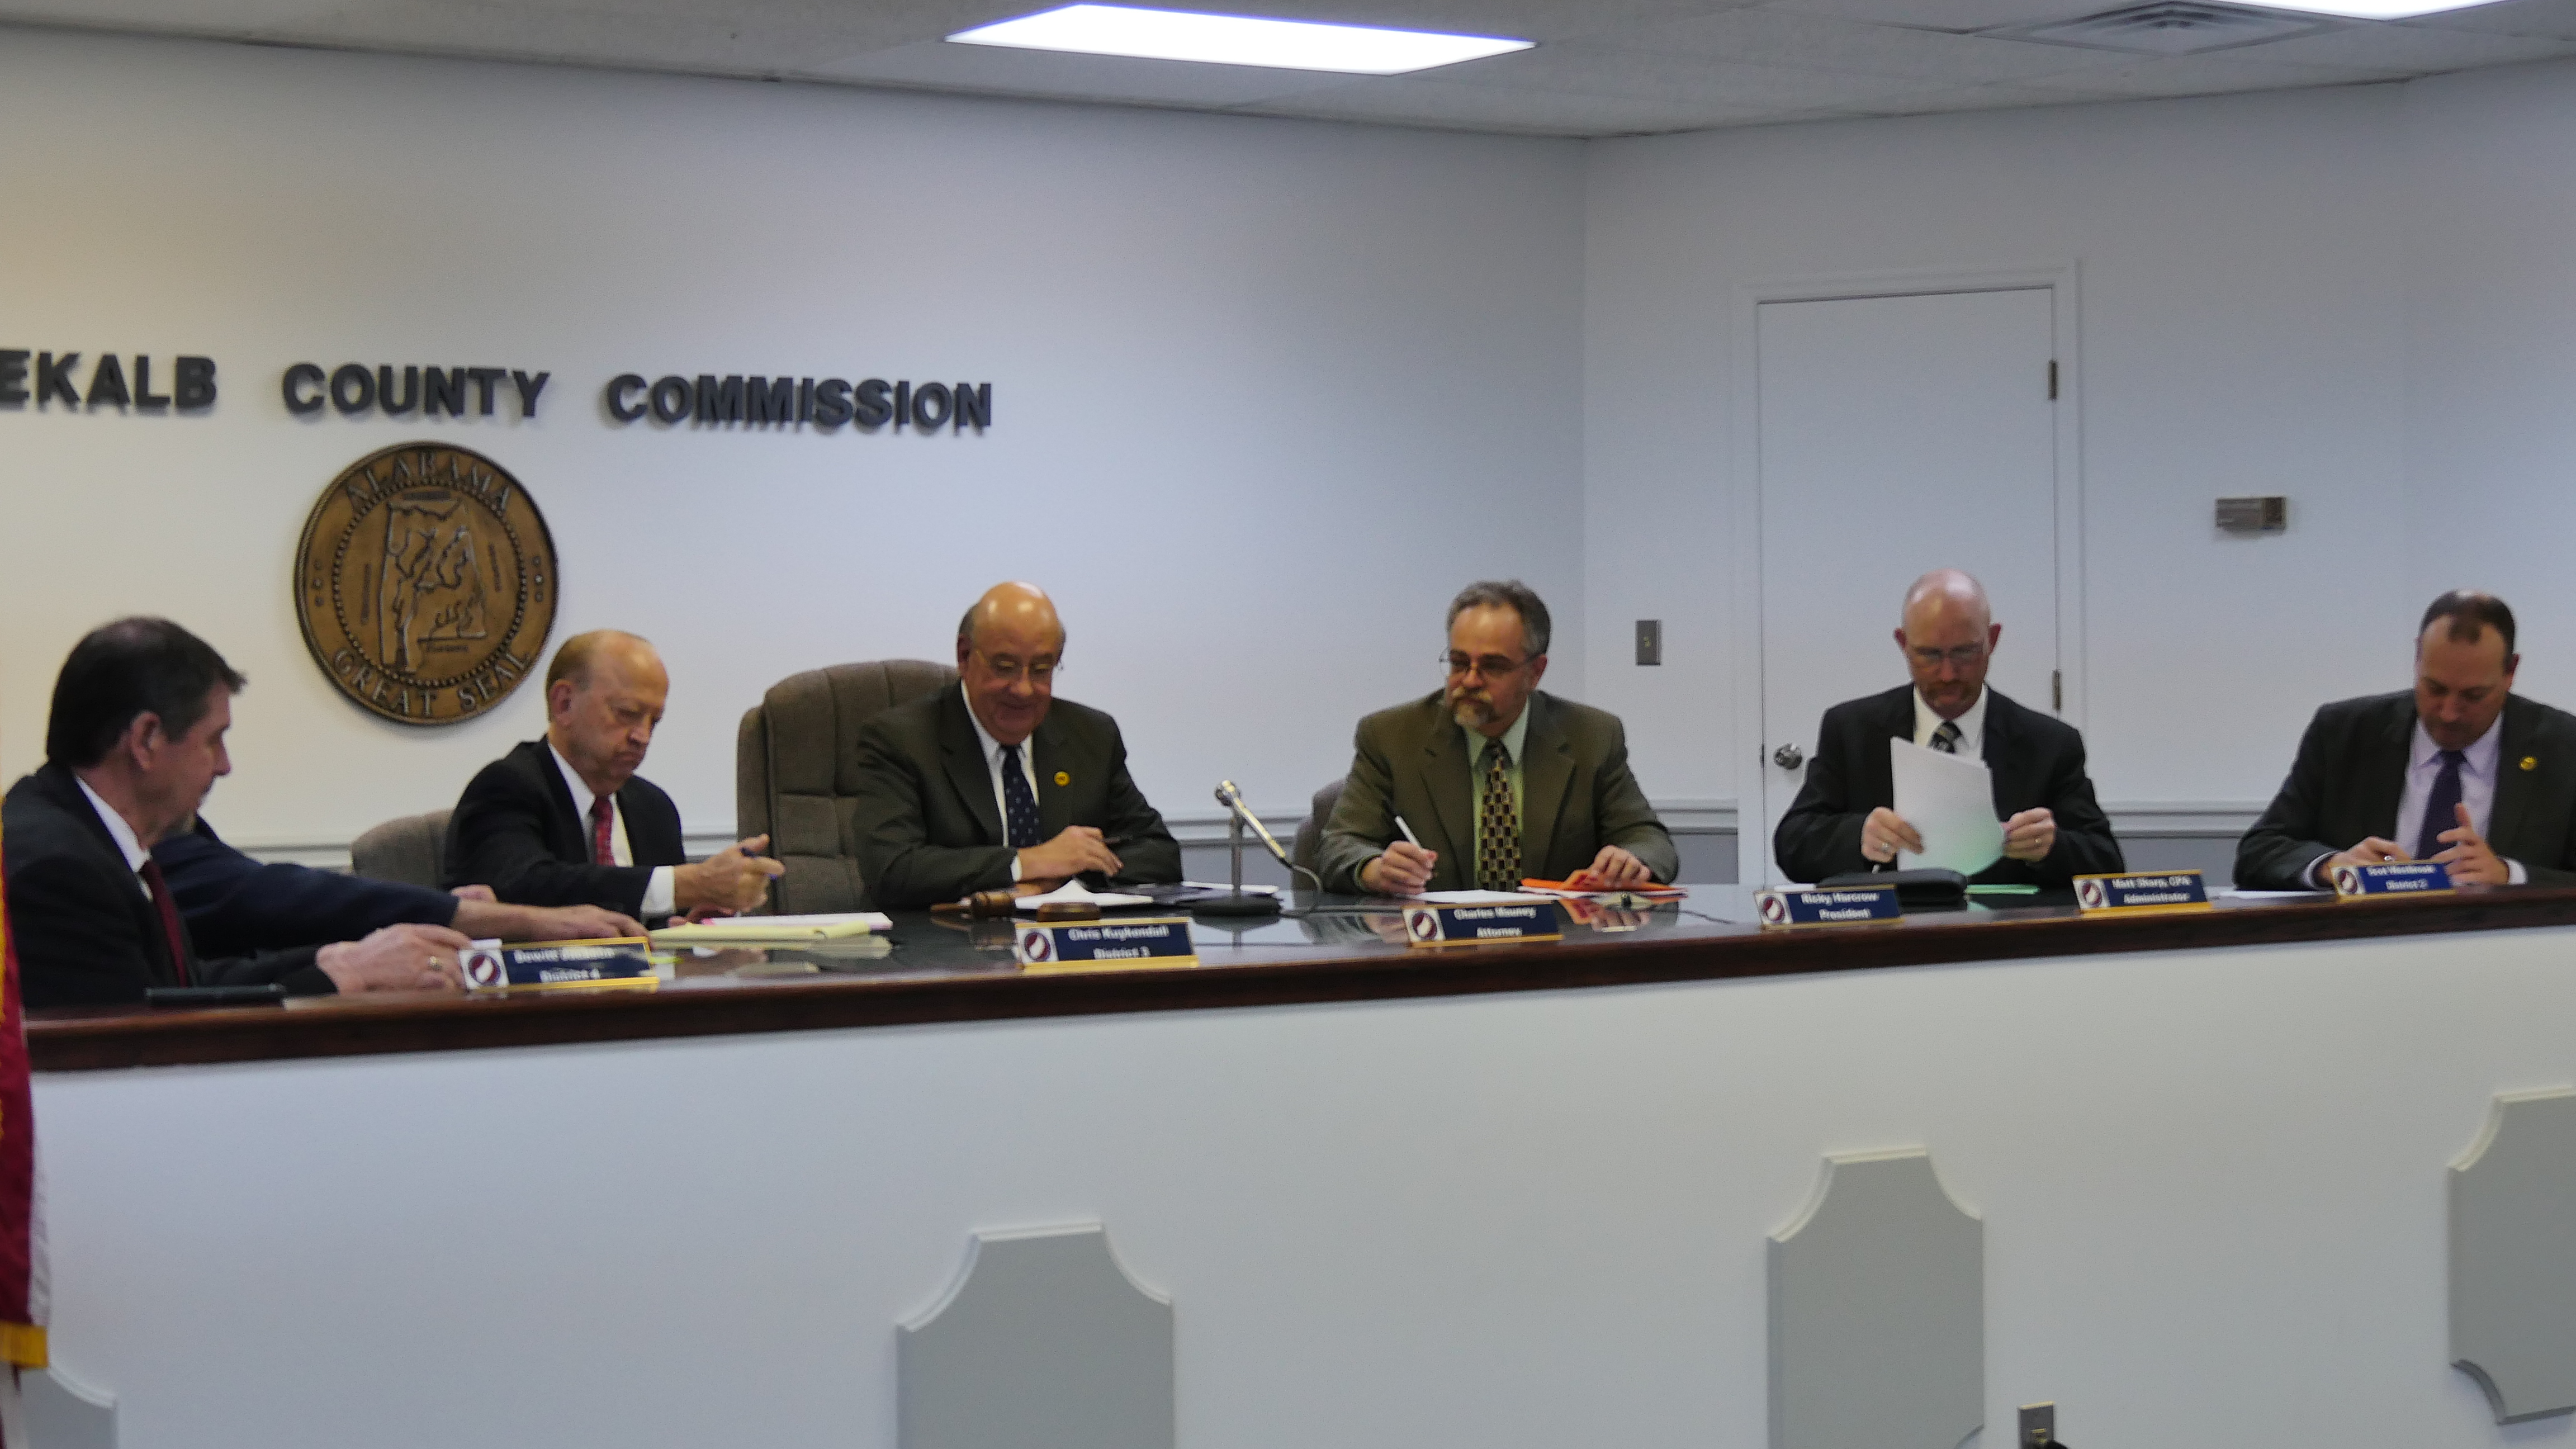 VIDEO: County Commission handles personnel changes in short meeting